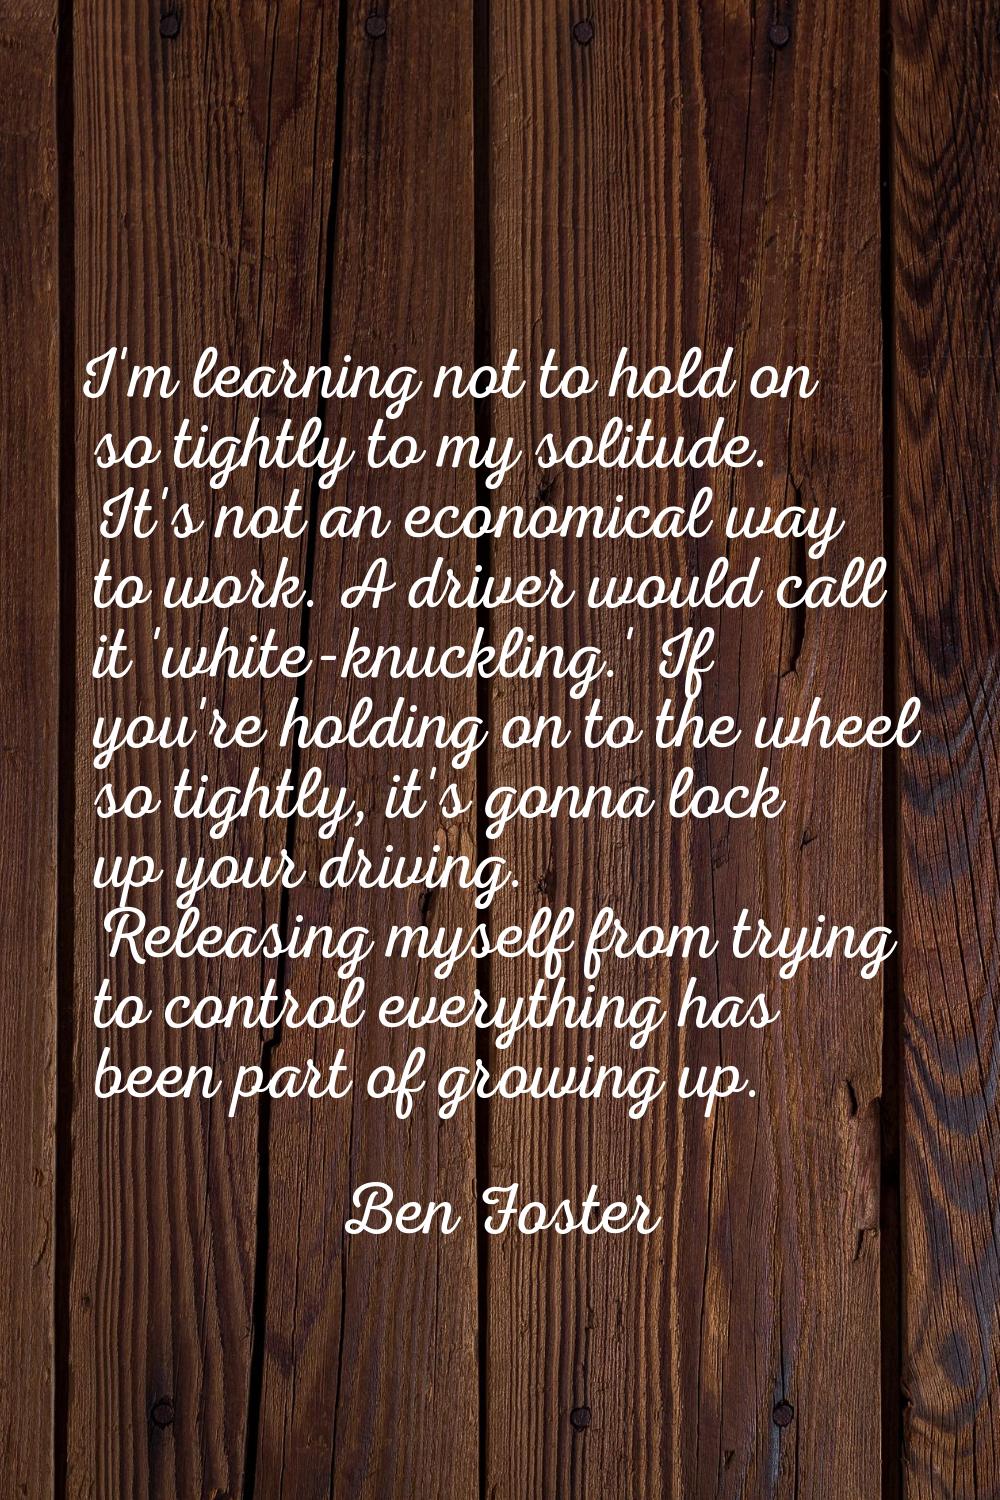 I'm learning not to hold on so tightly to my solitude. It's not an economical way to work. A driver